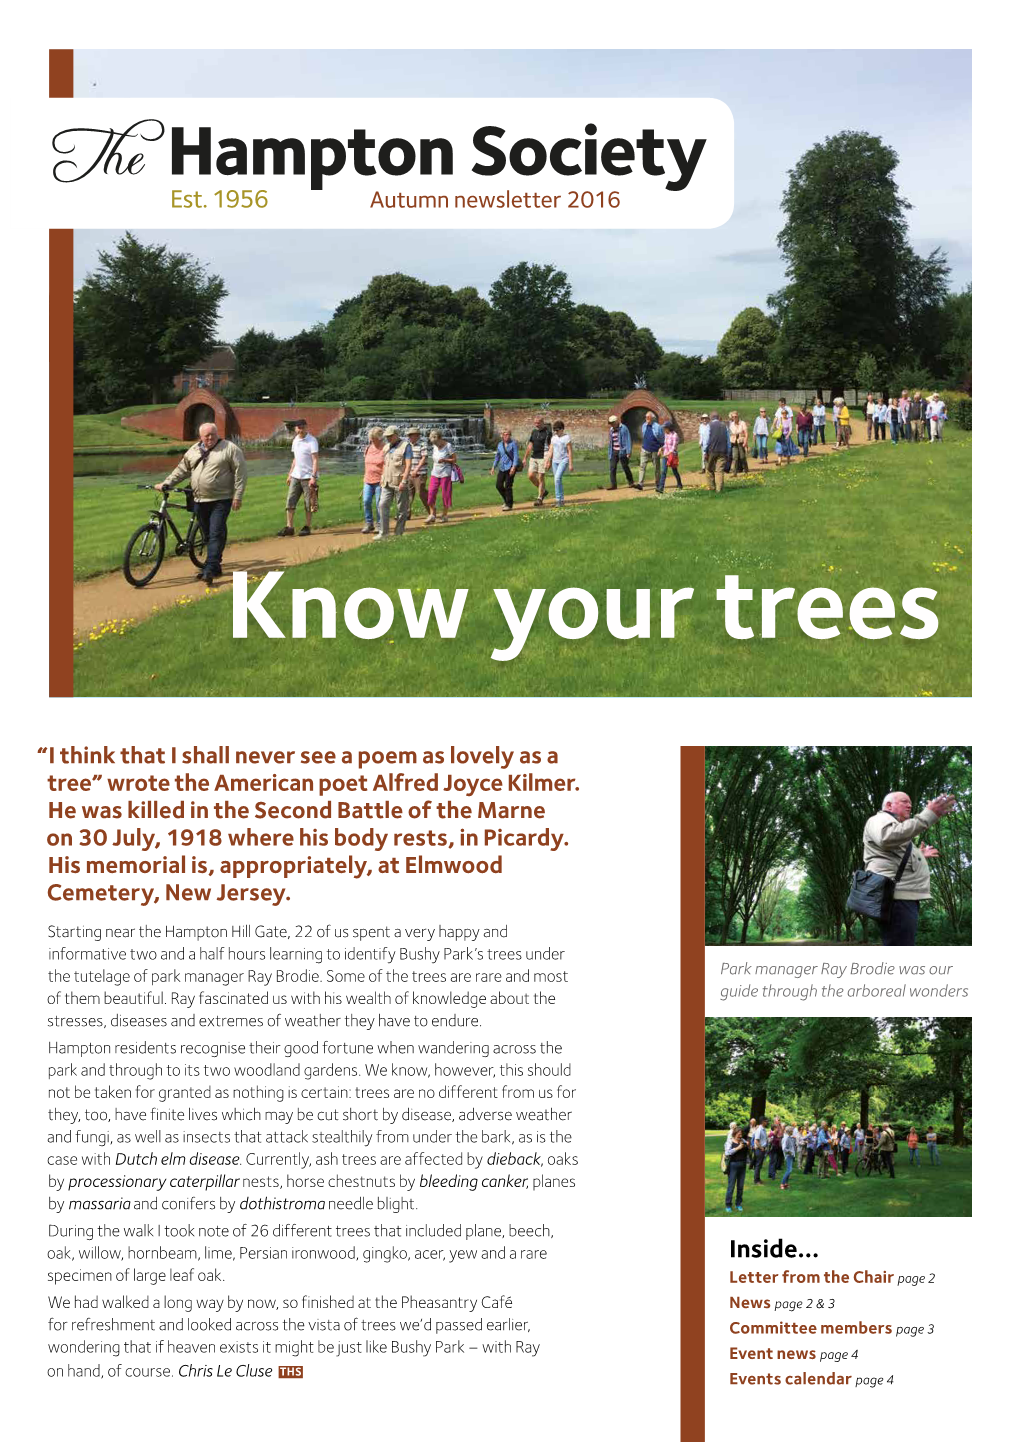 Know Your Trees Do You Have a Story to Share? Please Contact Our Editor Maura Waters with Your News on 8979 9654